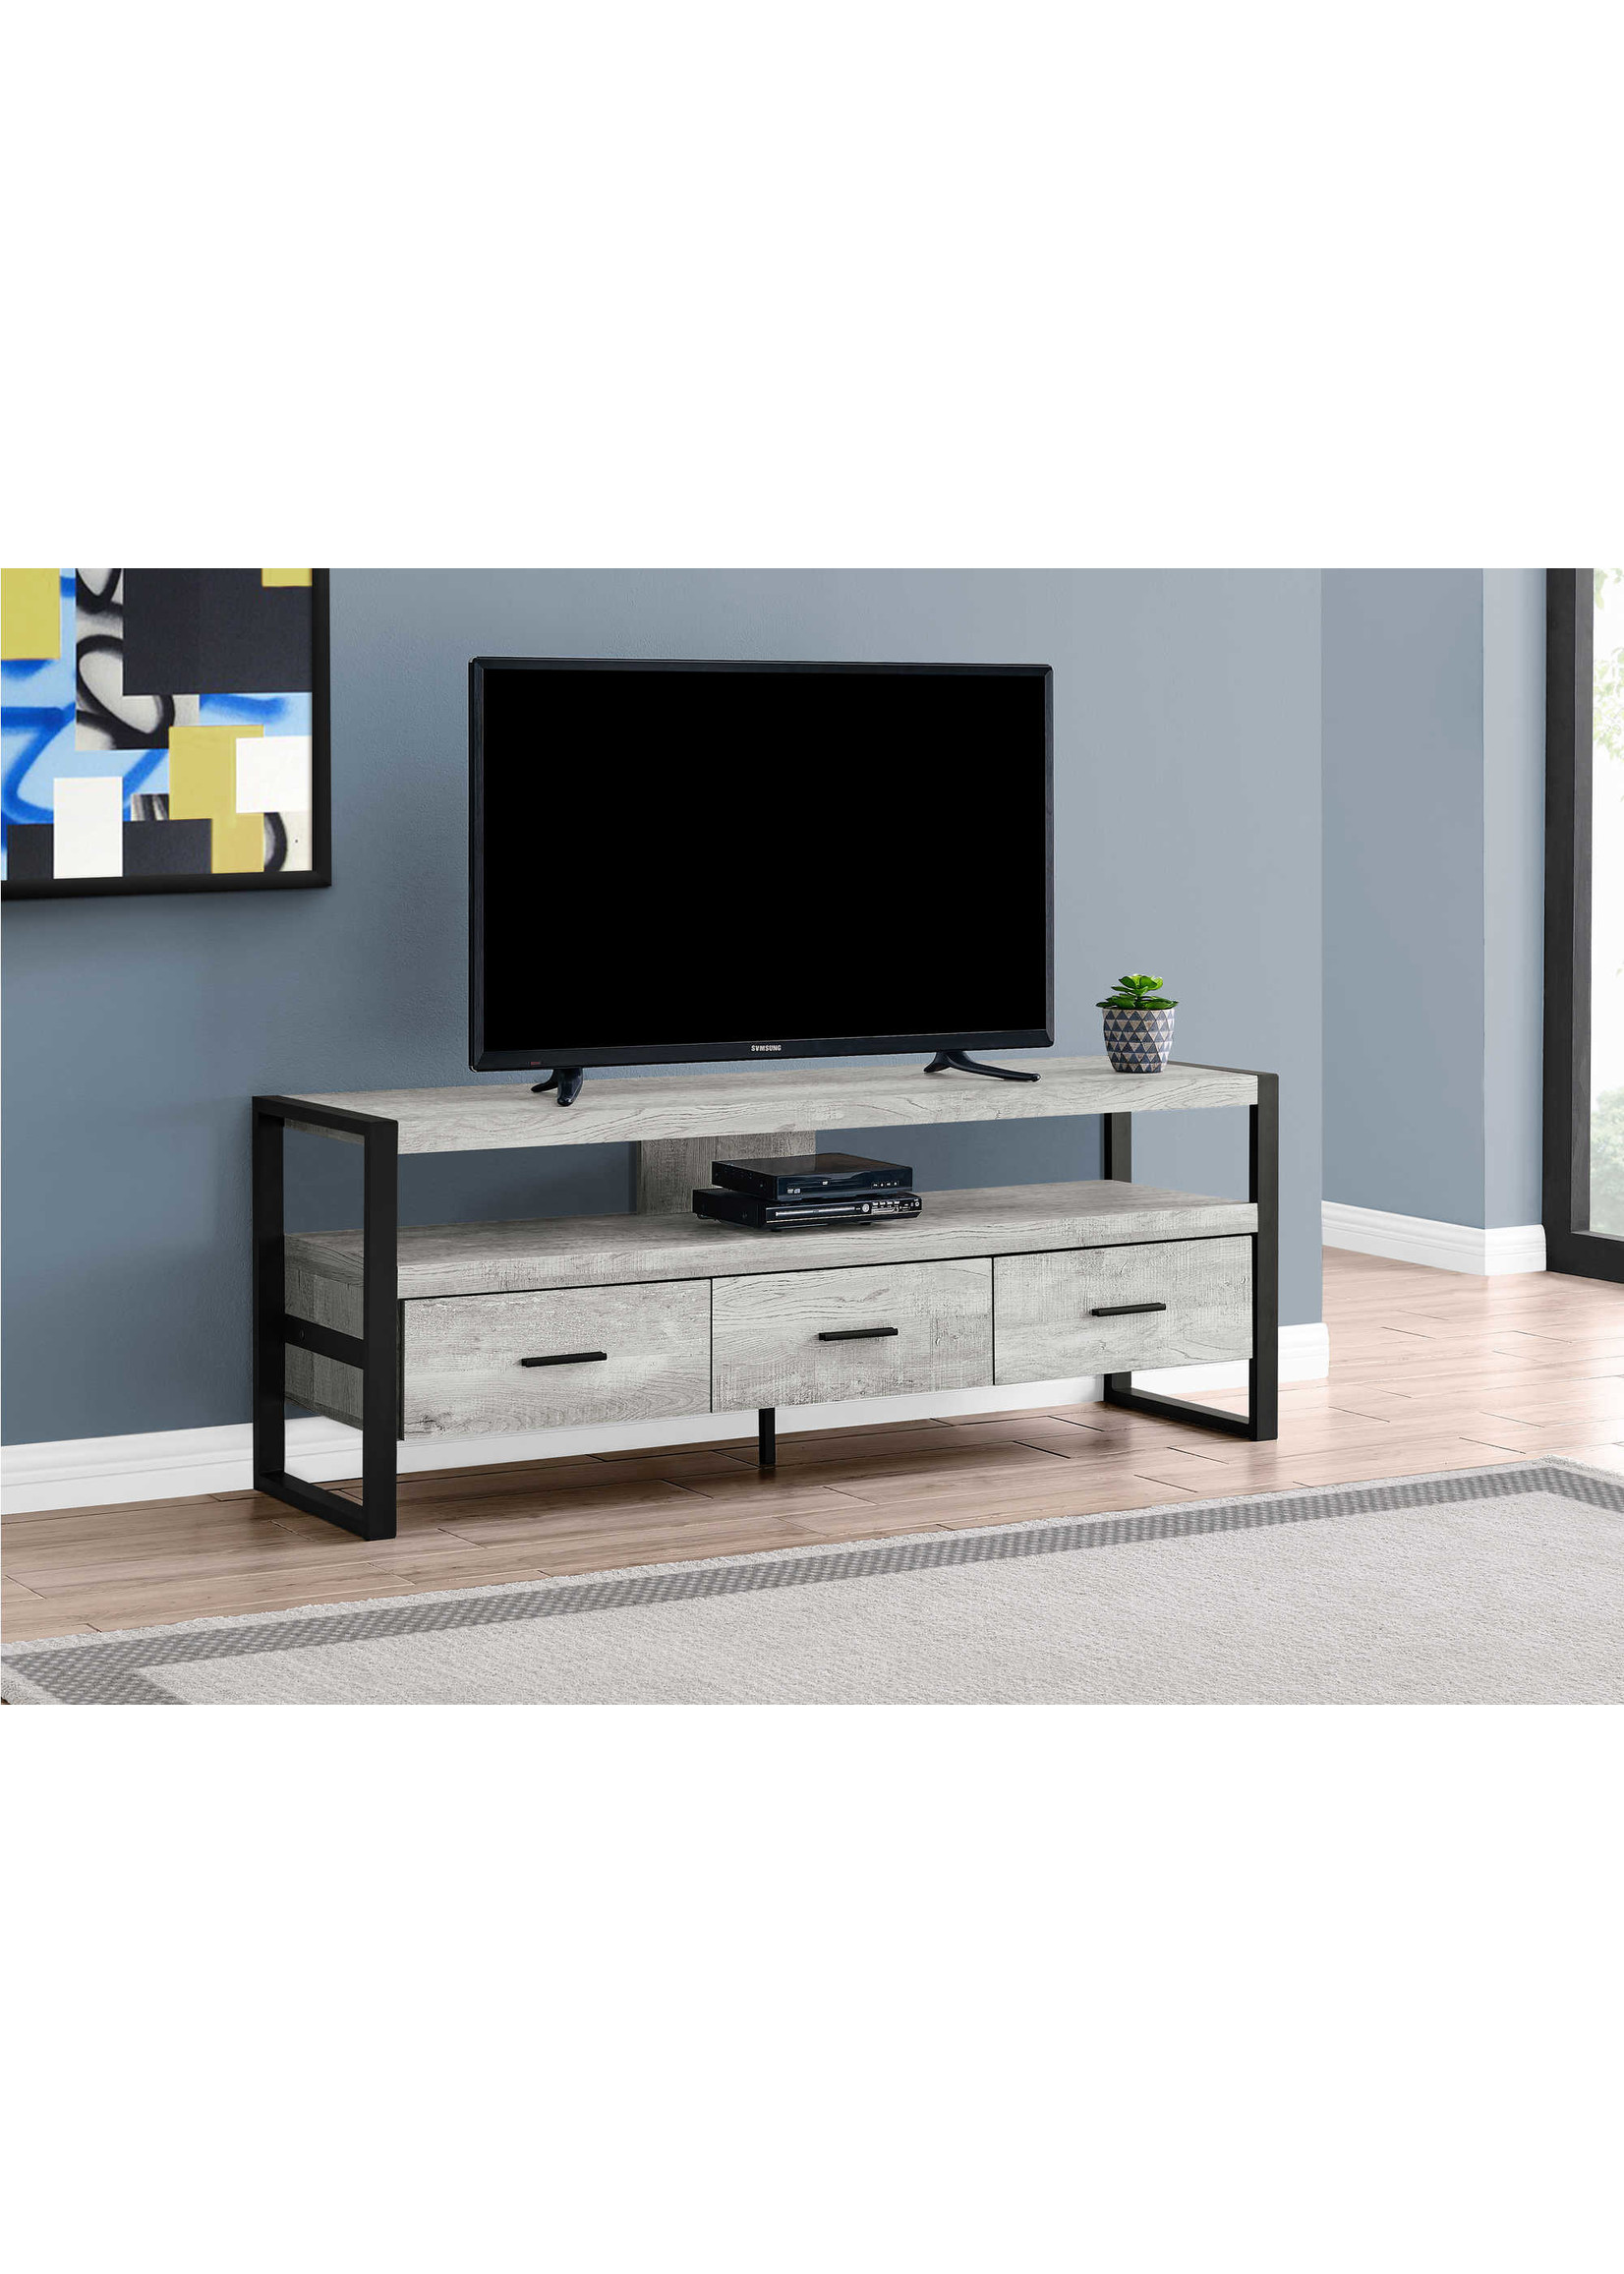 TV STAND - 60"L / GREY RECLAIMED WOOD-LOOK / 3 DRAWER